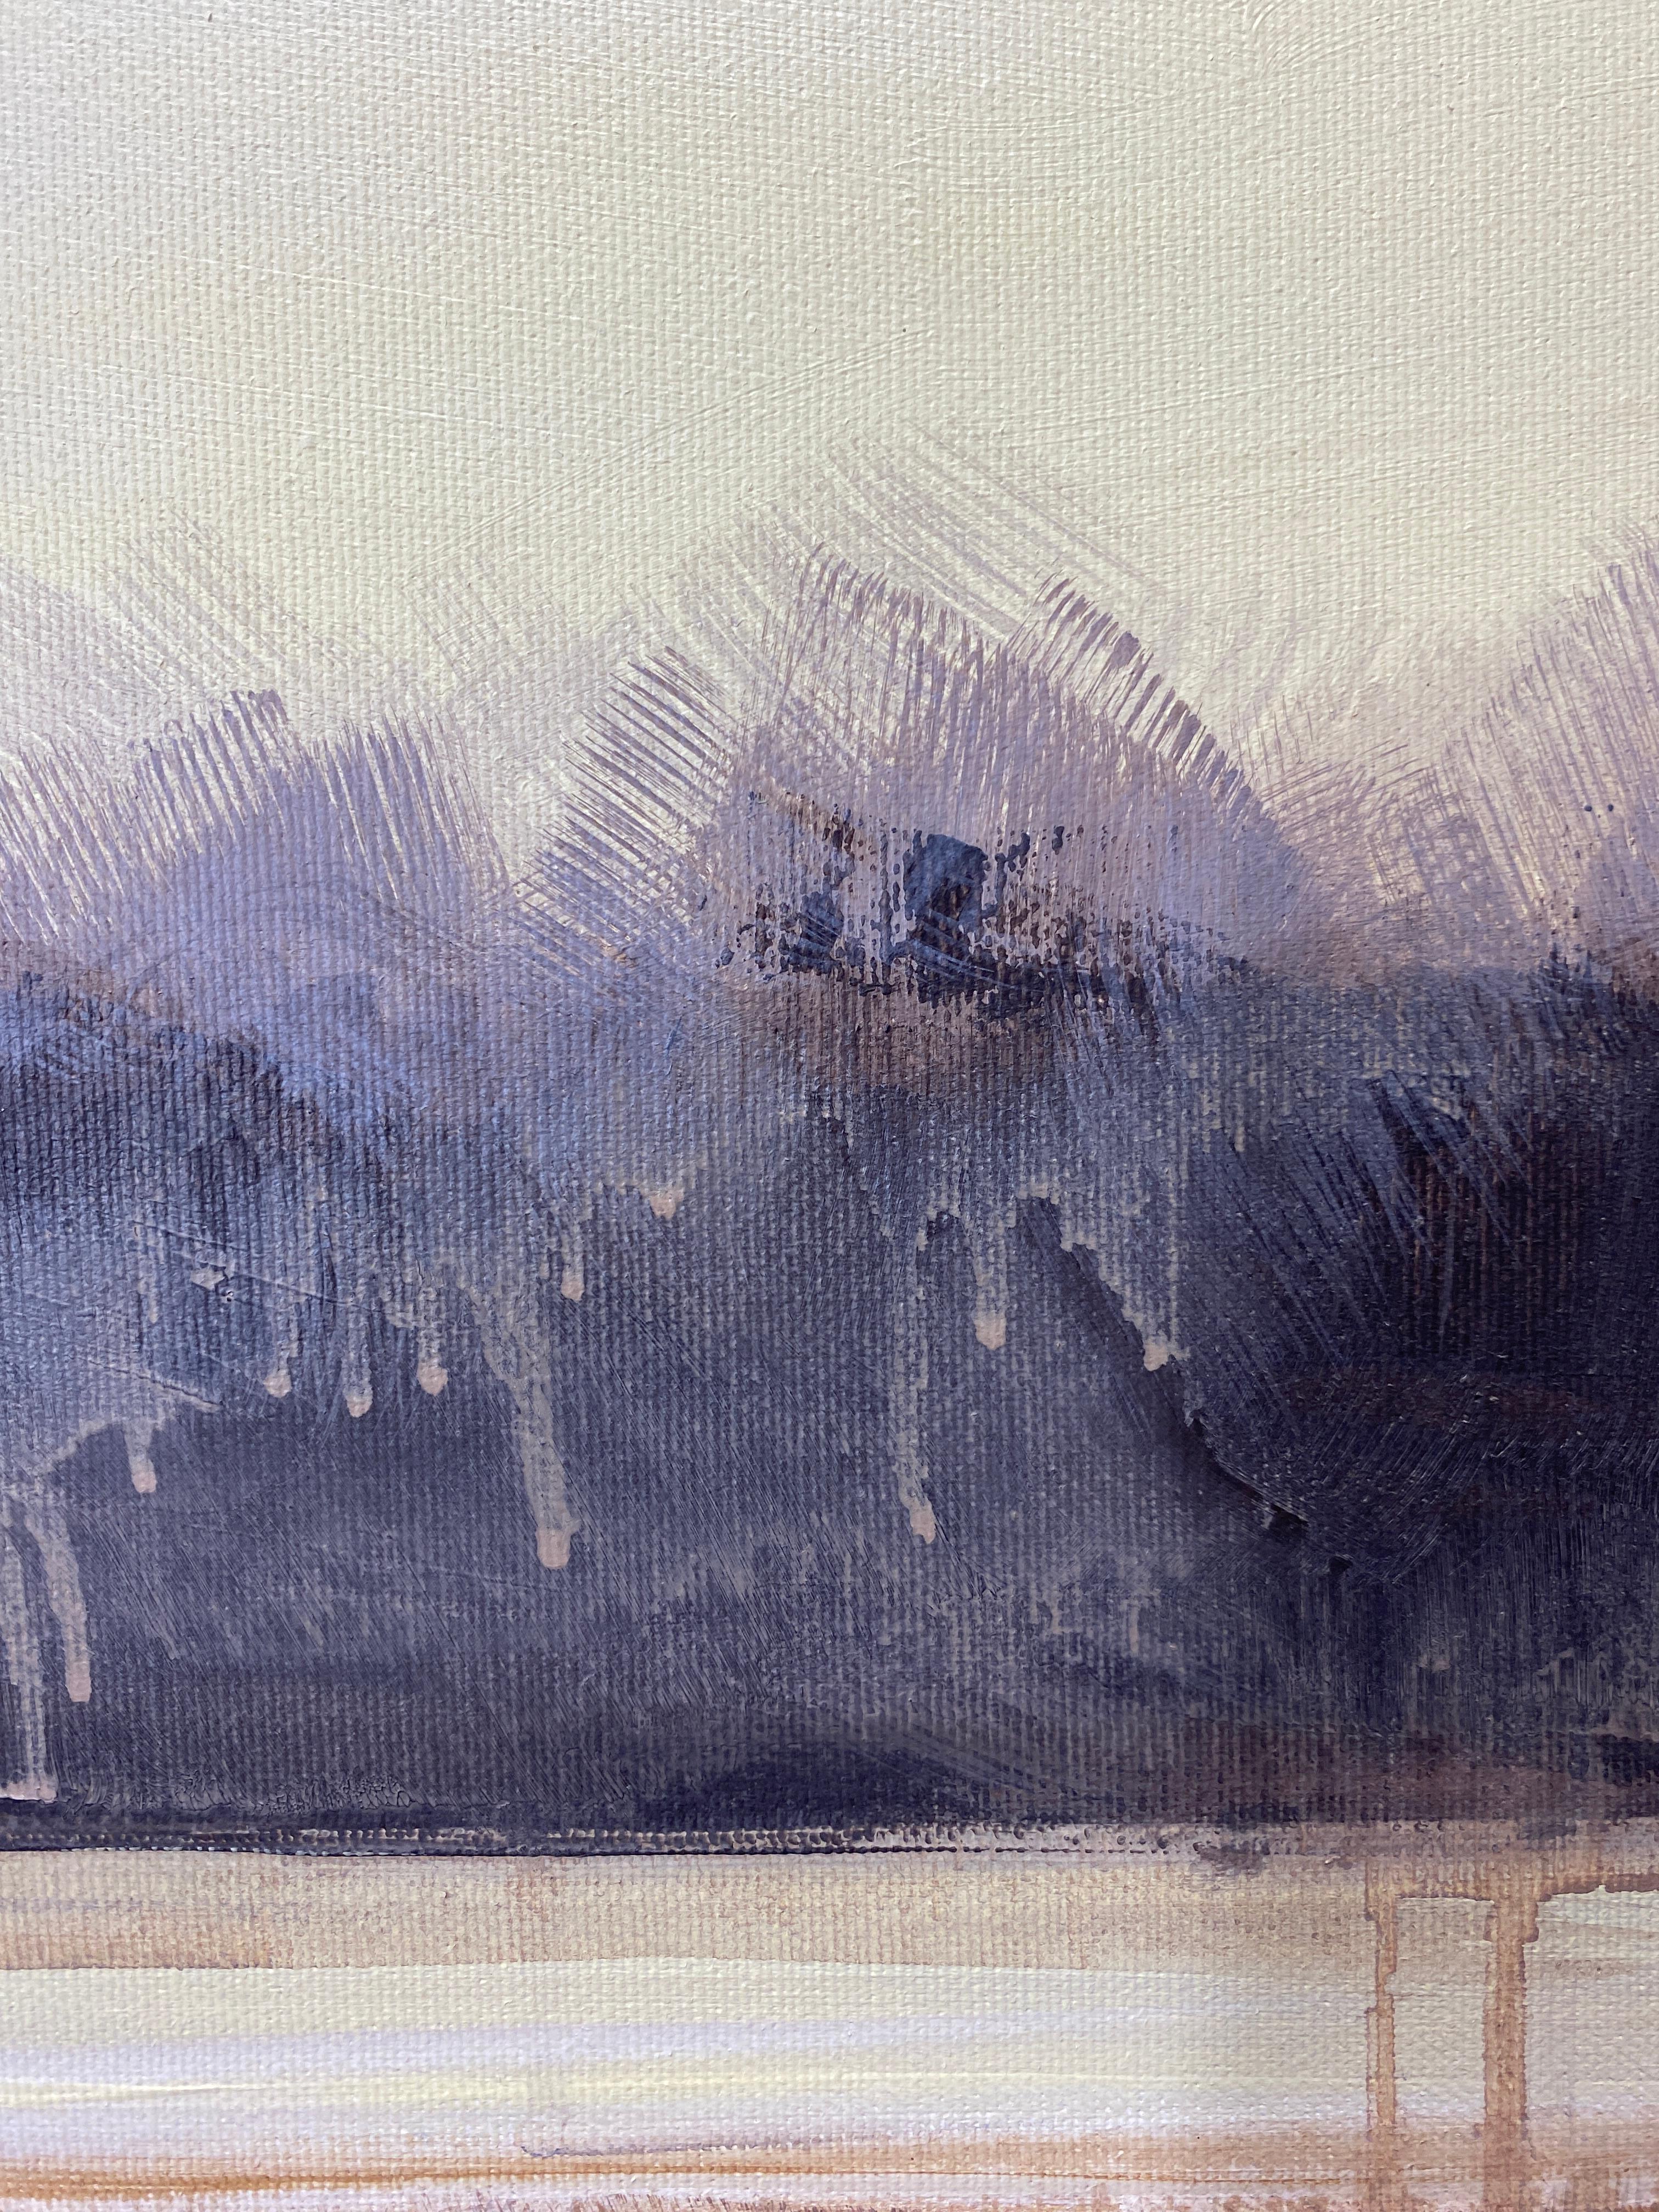 Mist Over Water - Painting by HELEN MOUNT